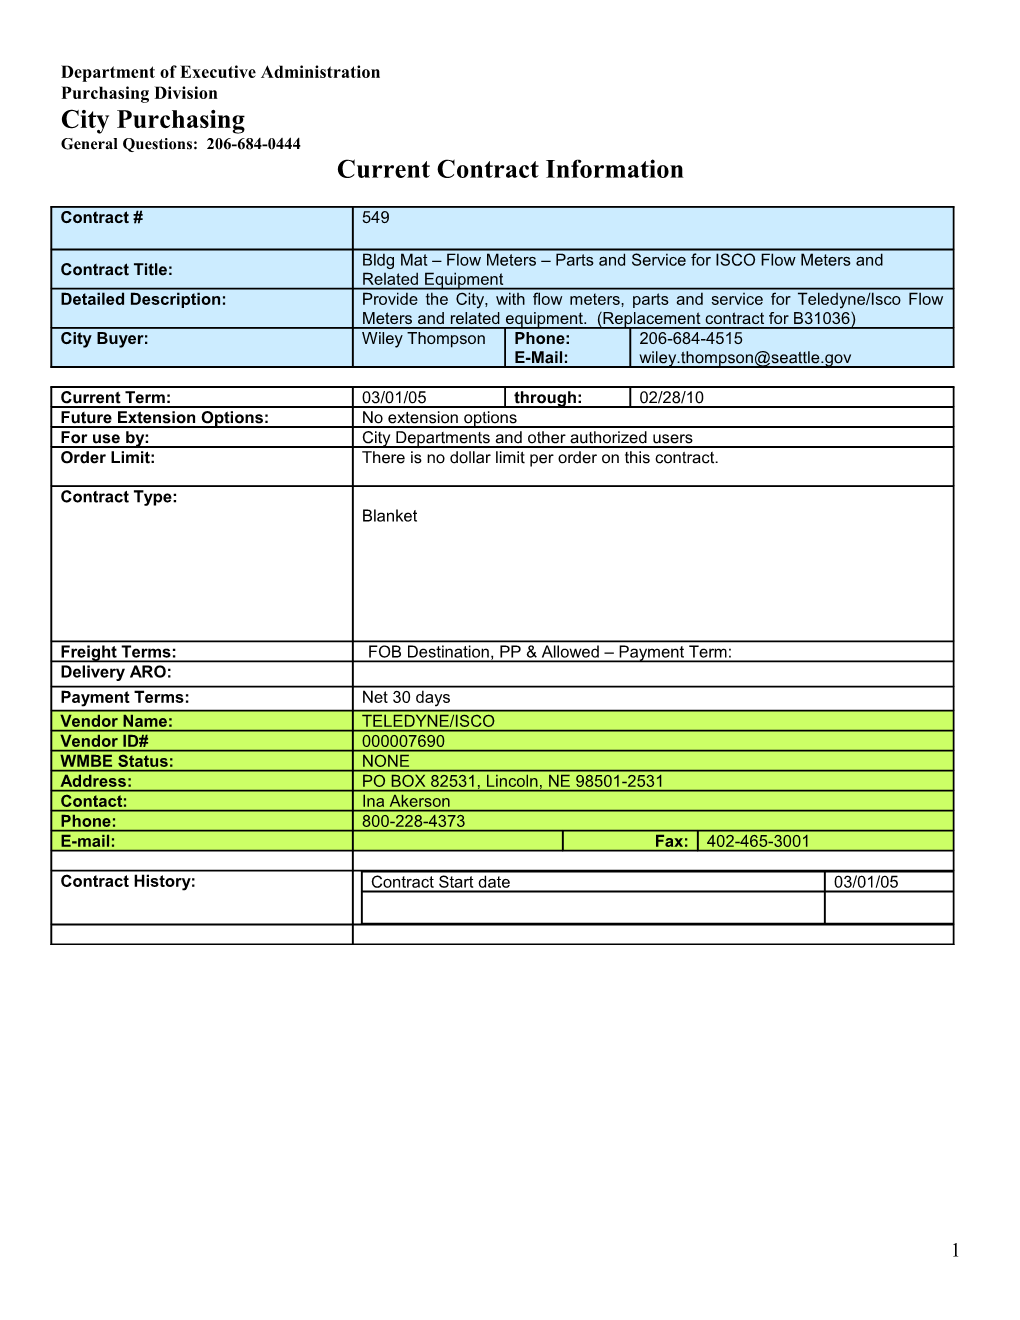 Current Contract Information Form s14